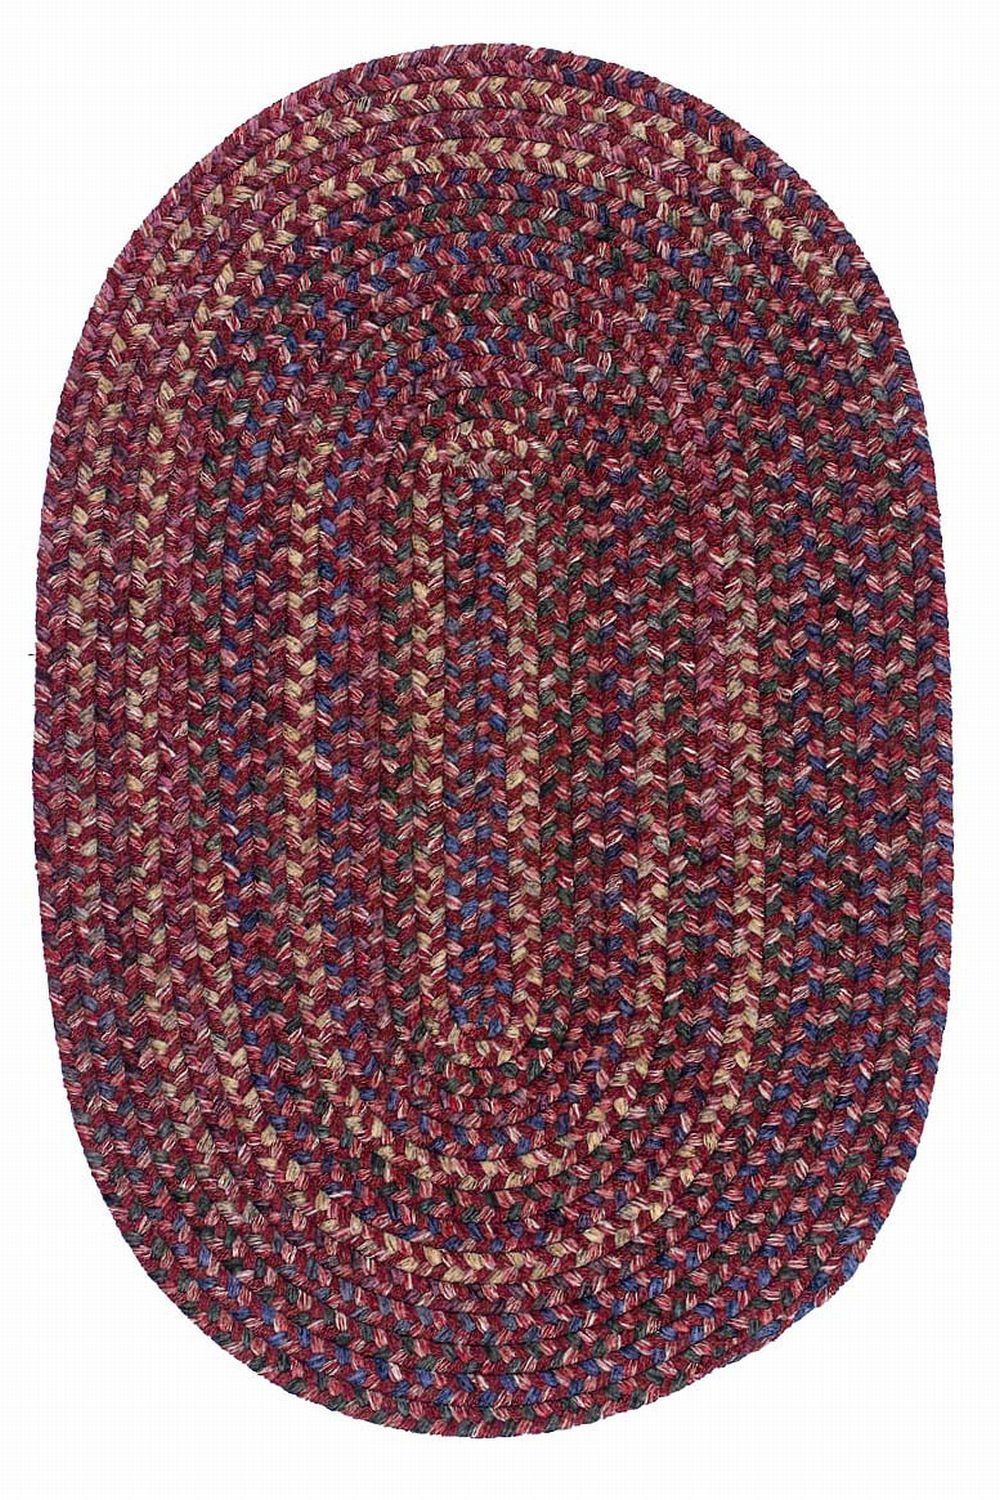 Large Premium Wool Braided Rug Red/Blue Cottage Carpet 7x9 7x10 Oval